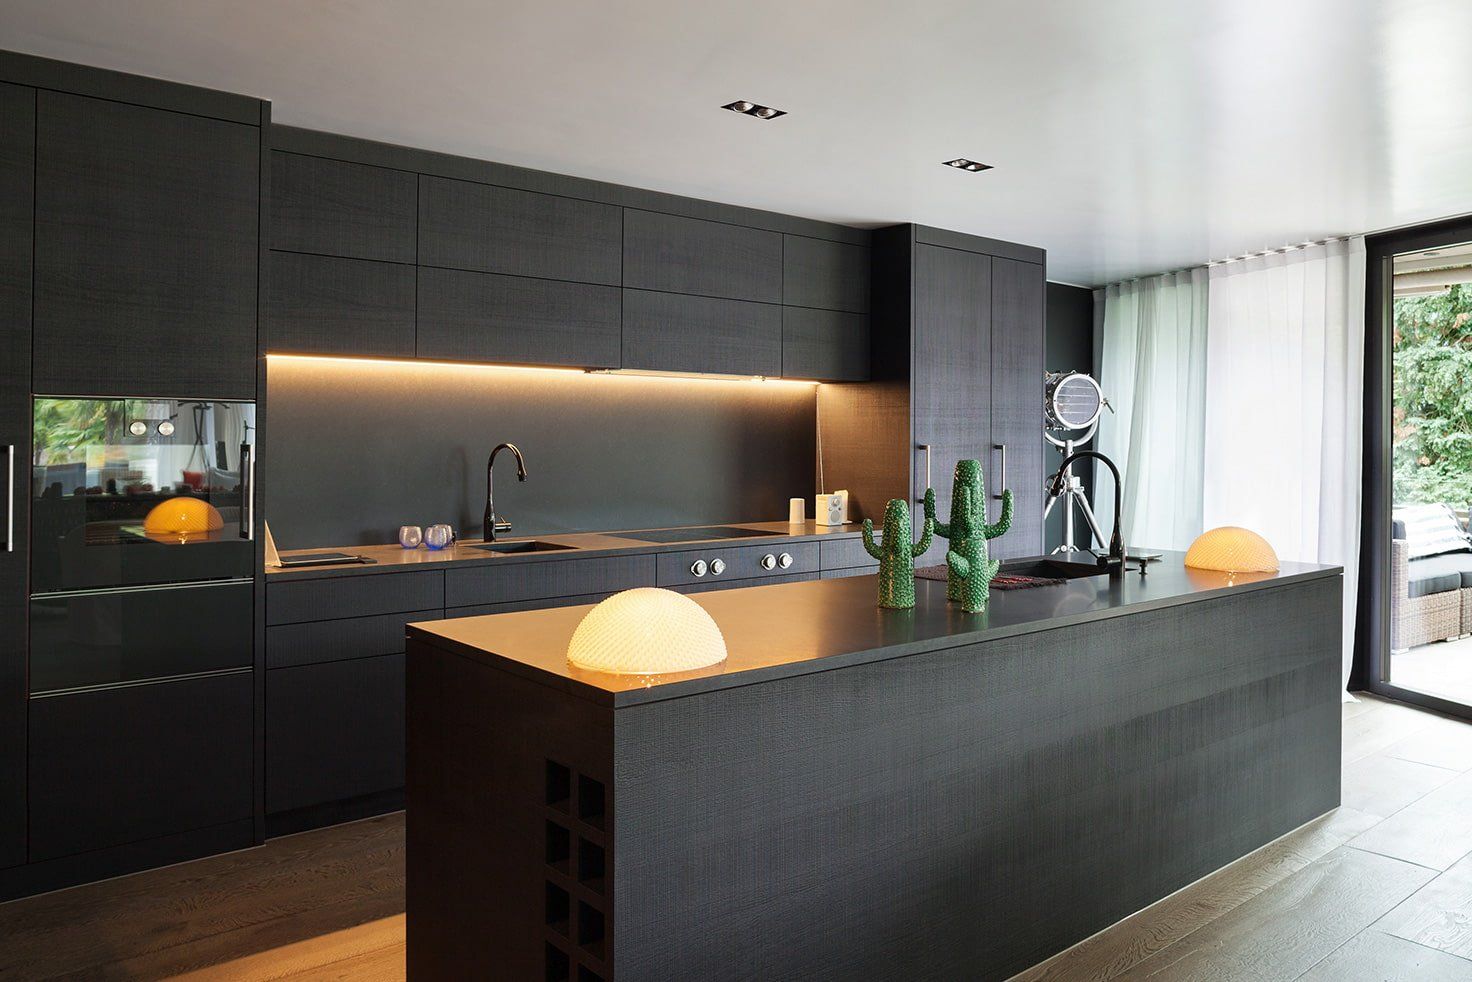 Modern Black Kitchen With Cactus Decor — Kitchen Renovations in Charmhaven, NSW